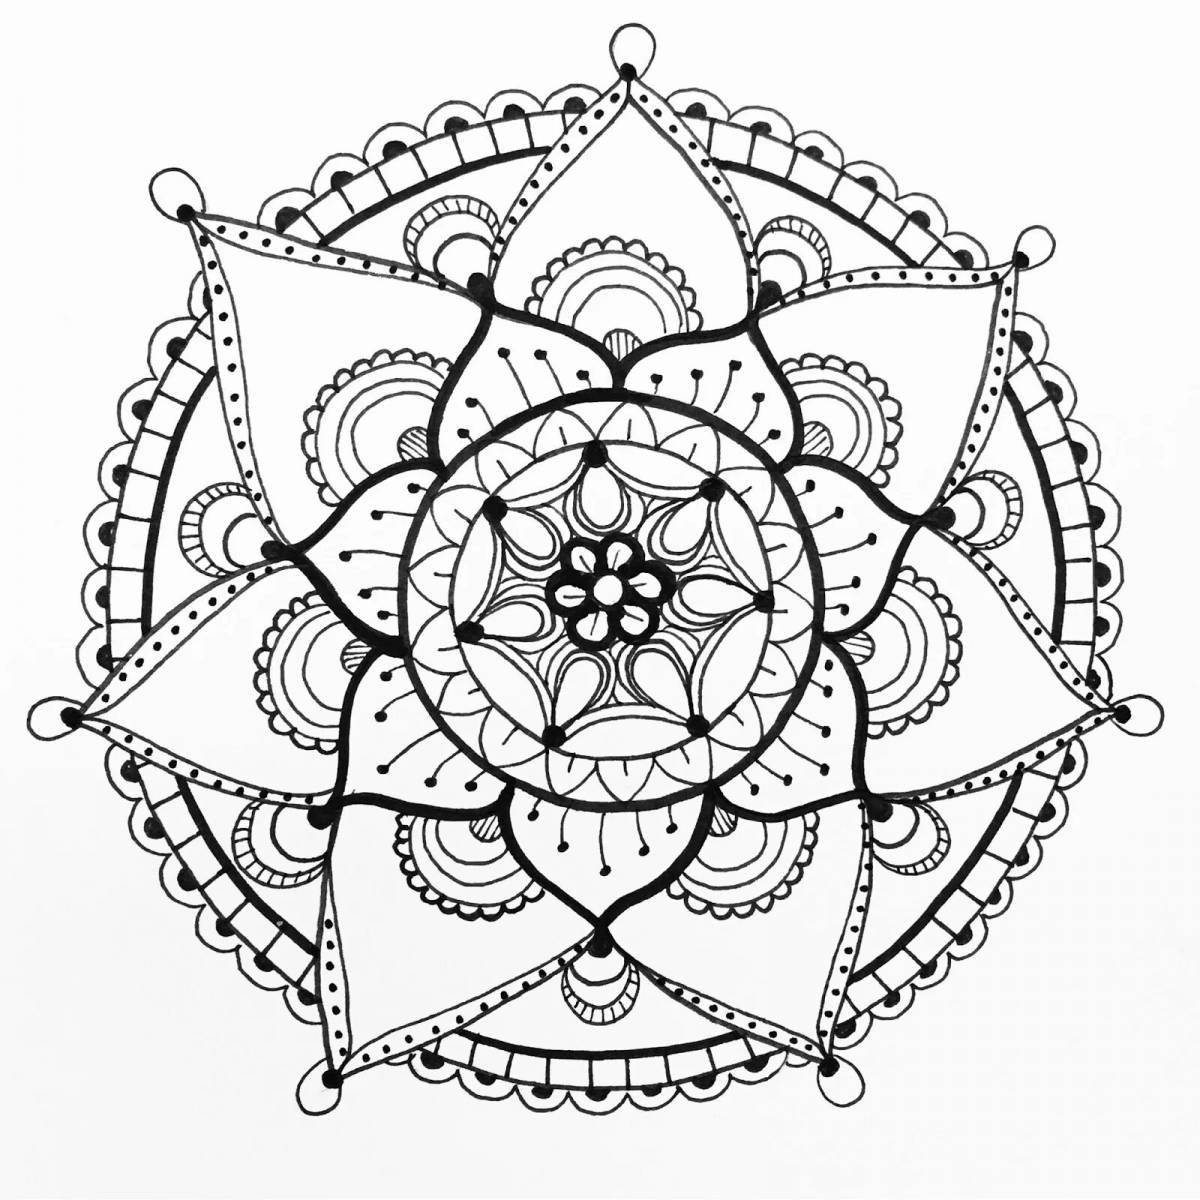 Amazing mandala coloring page for victory